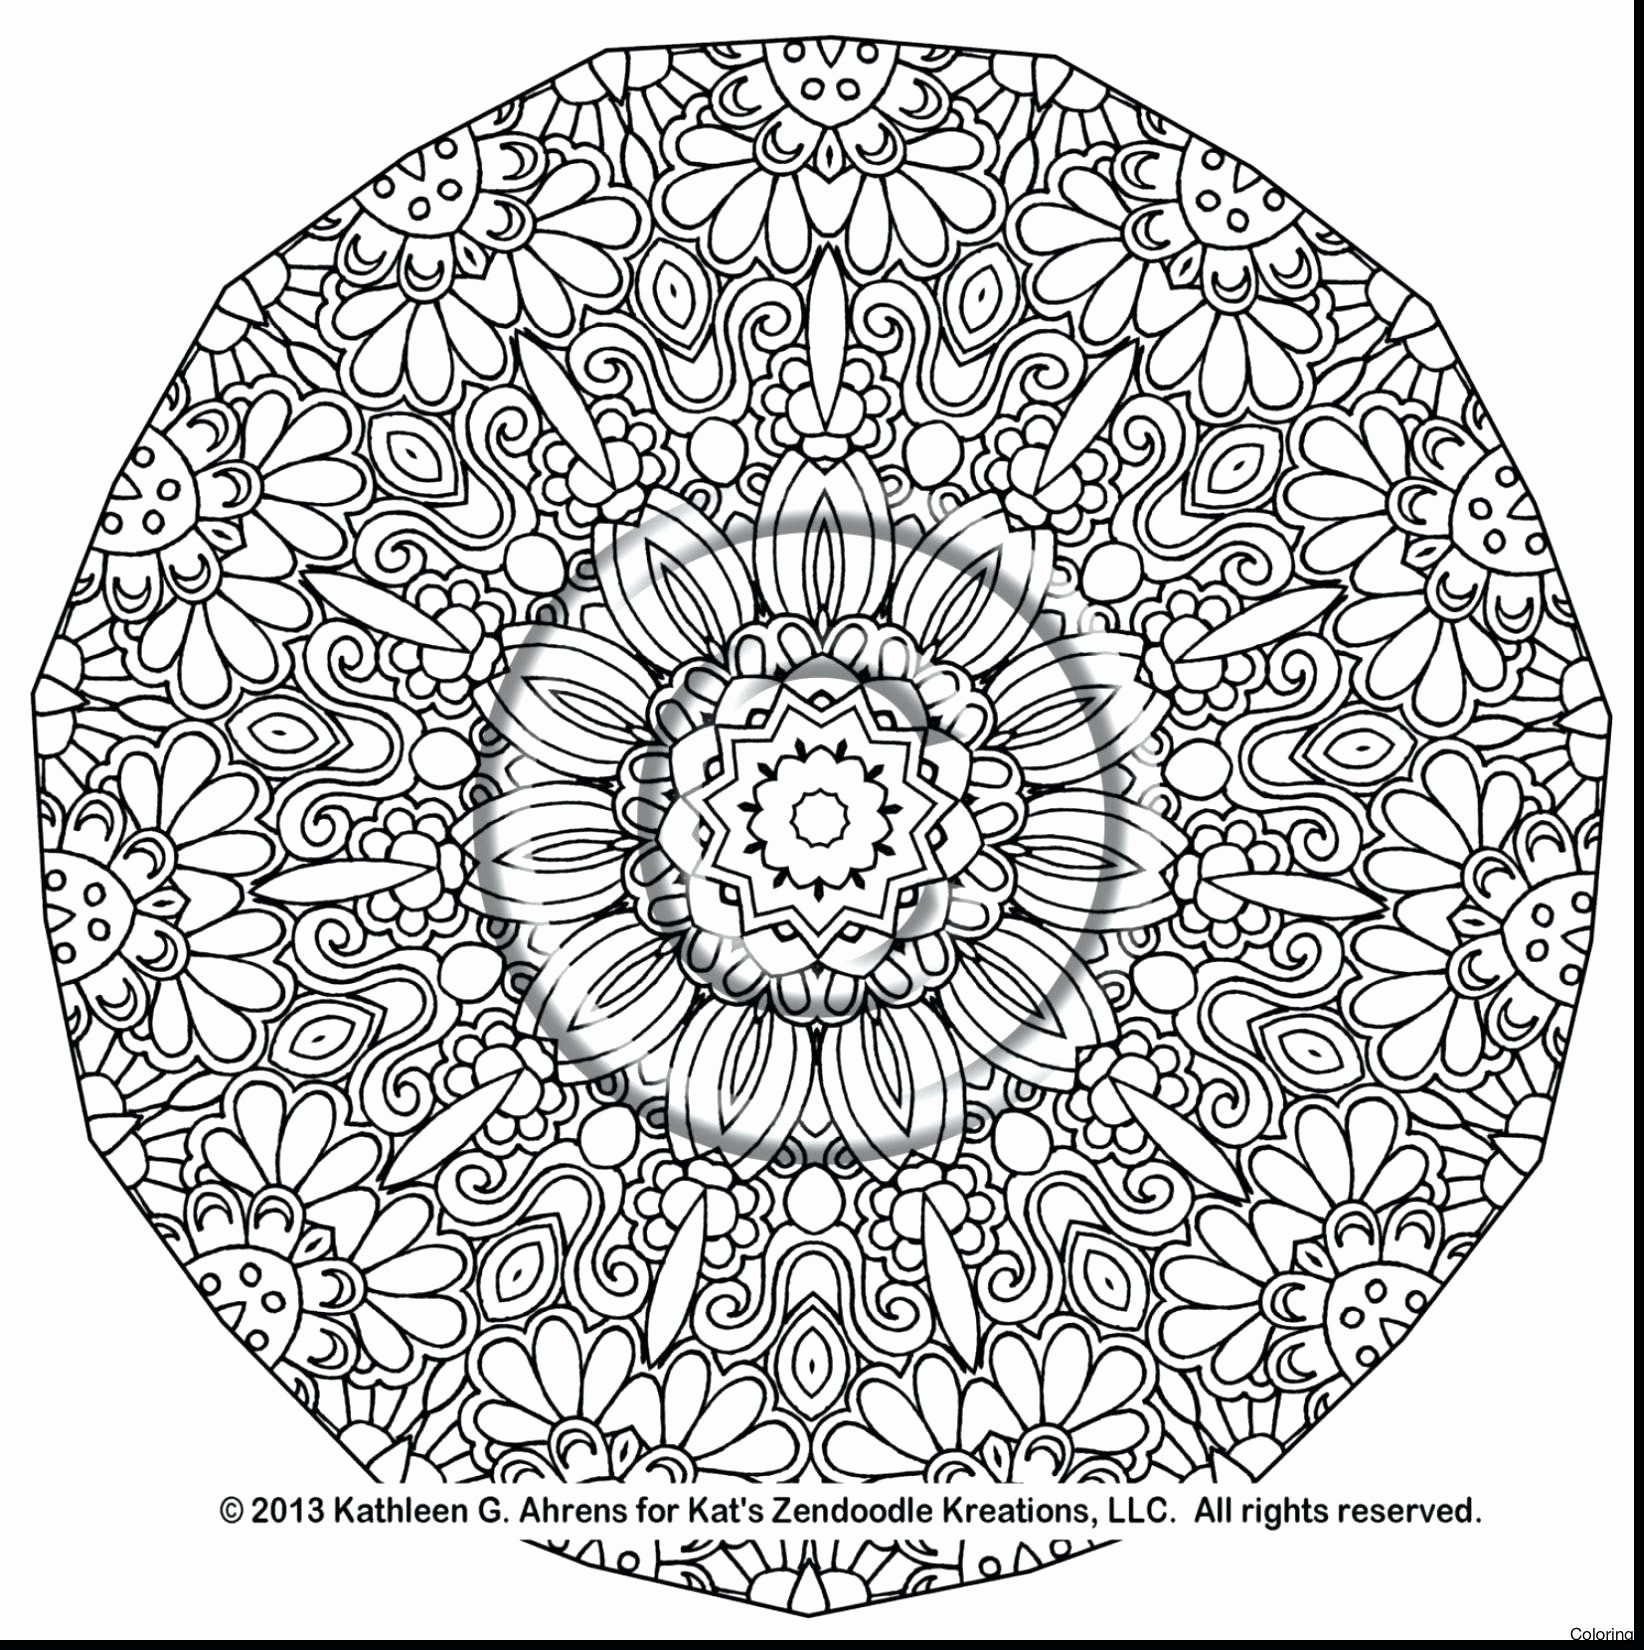 Mandala Coloring Pages For Adults Inspirational Free Geometric Coloring Pages For Adults Wwwpantry